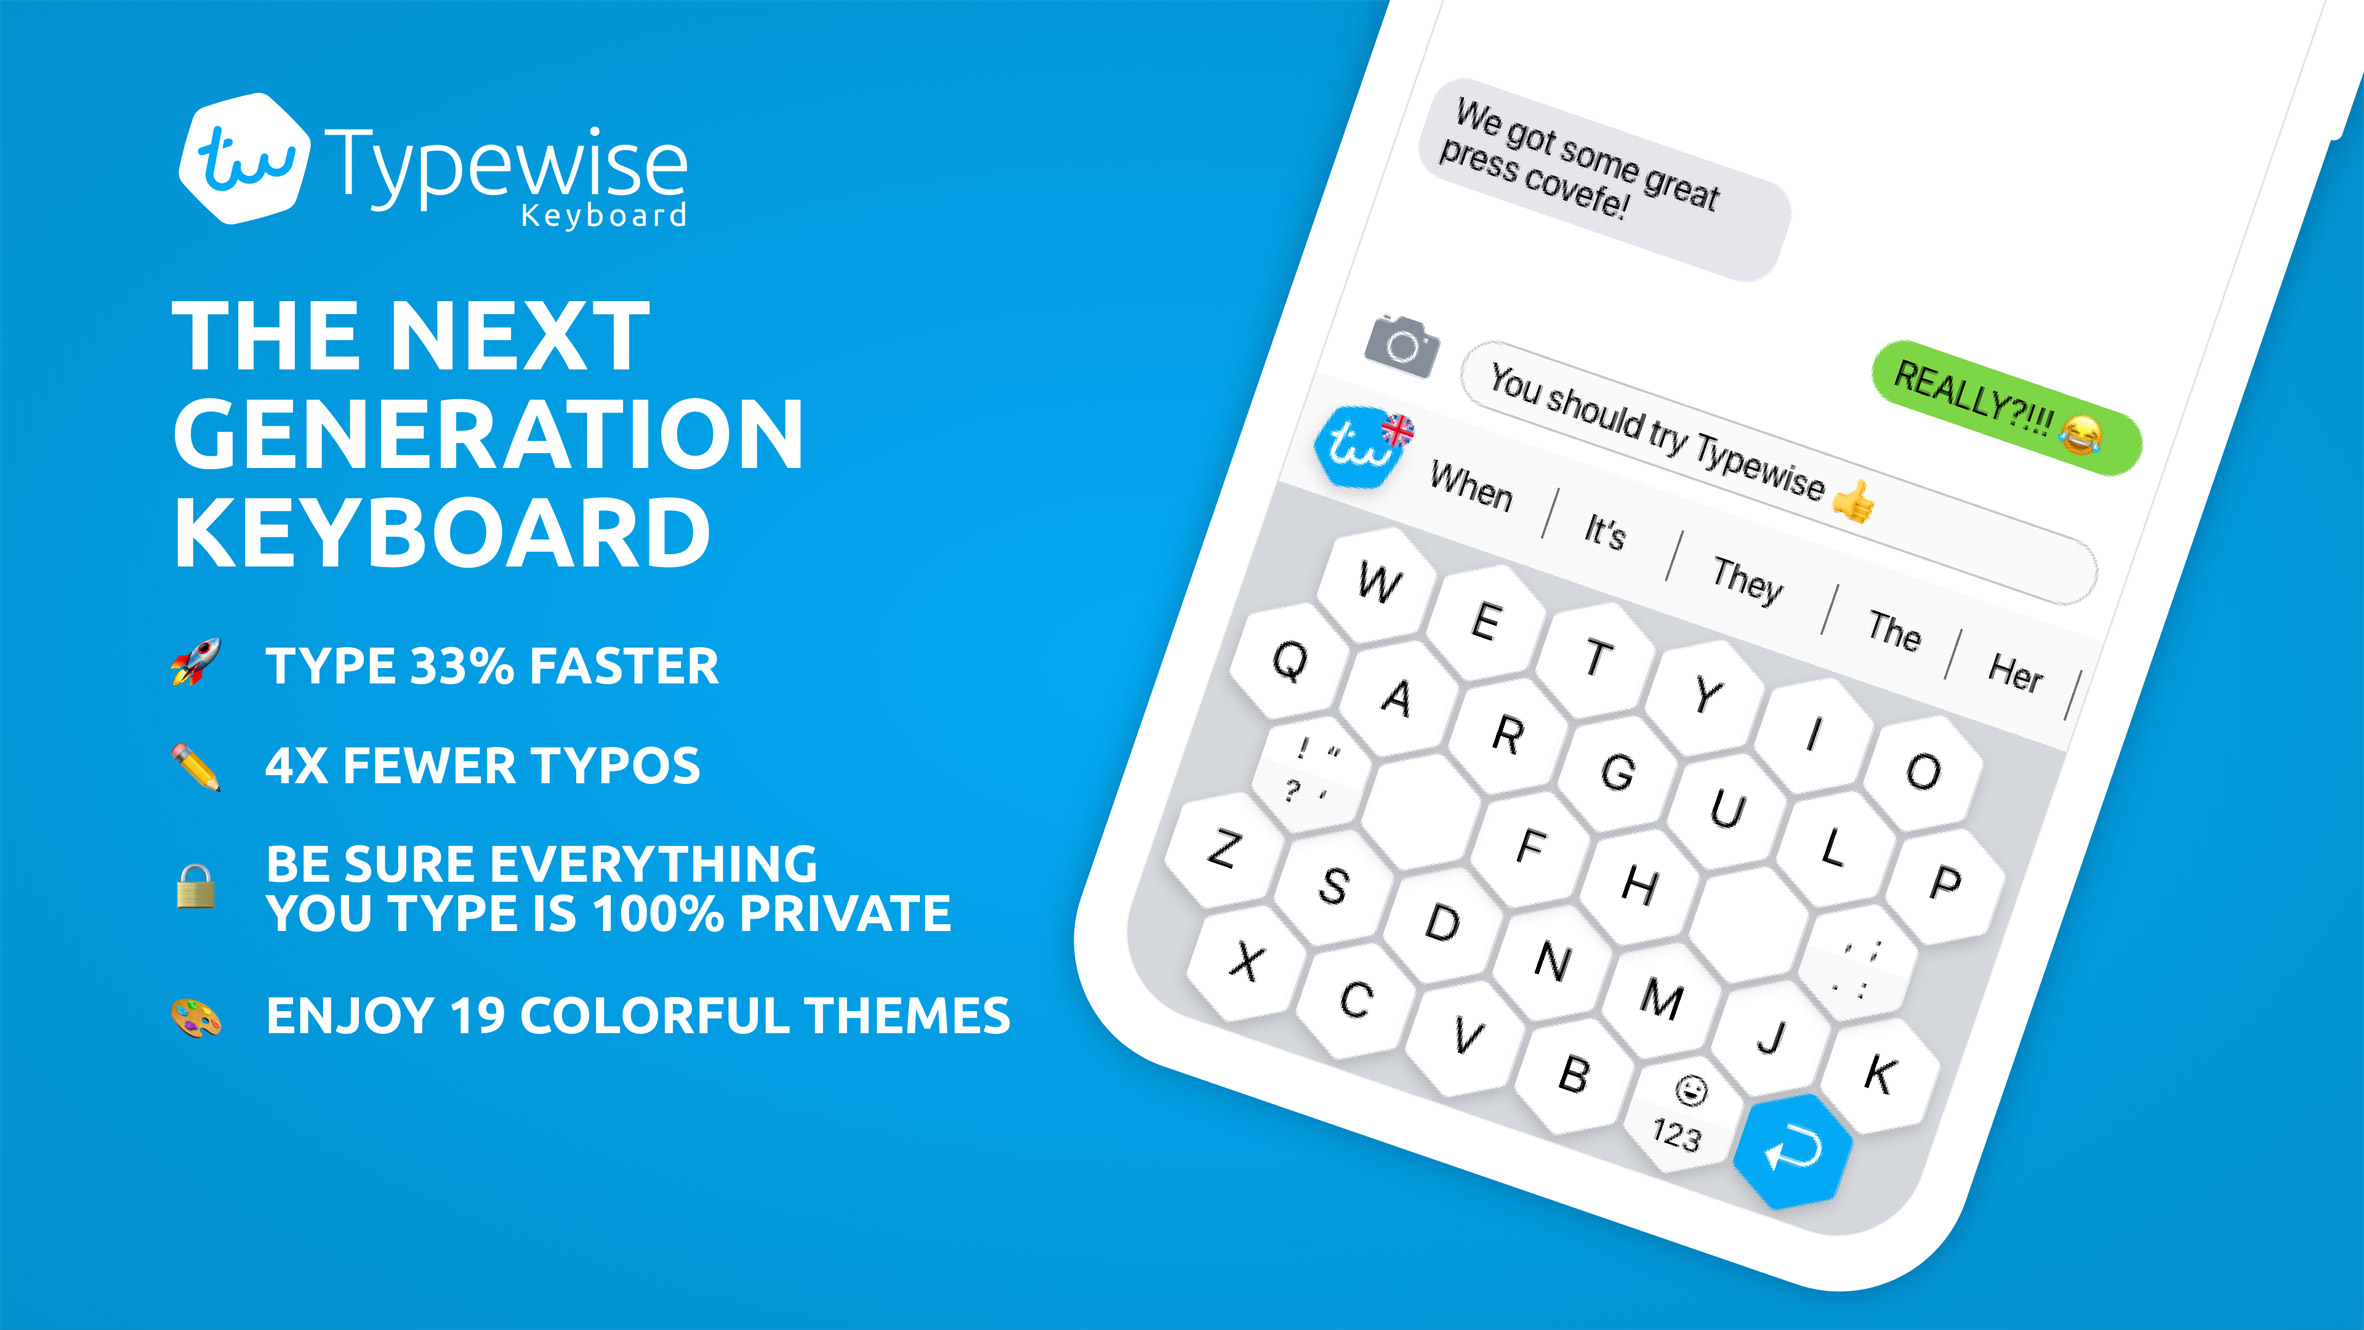 Typewise keyboard features